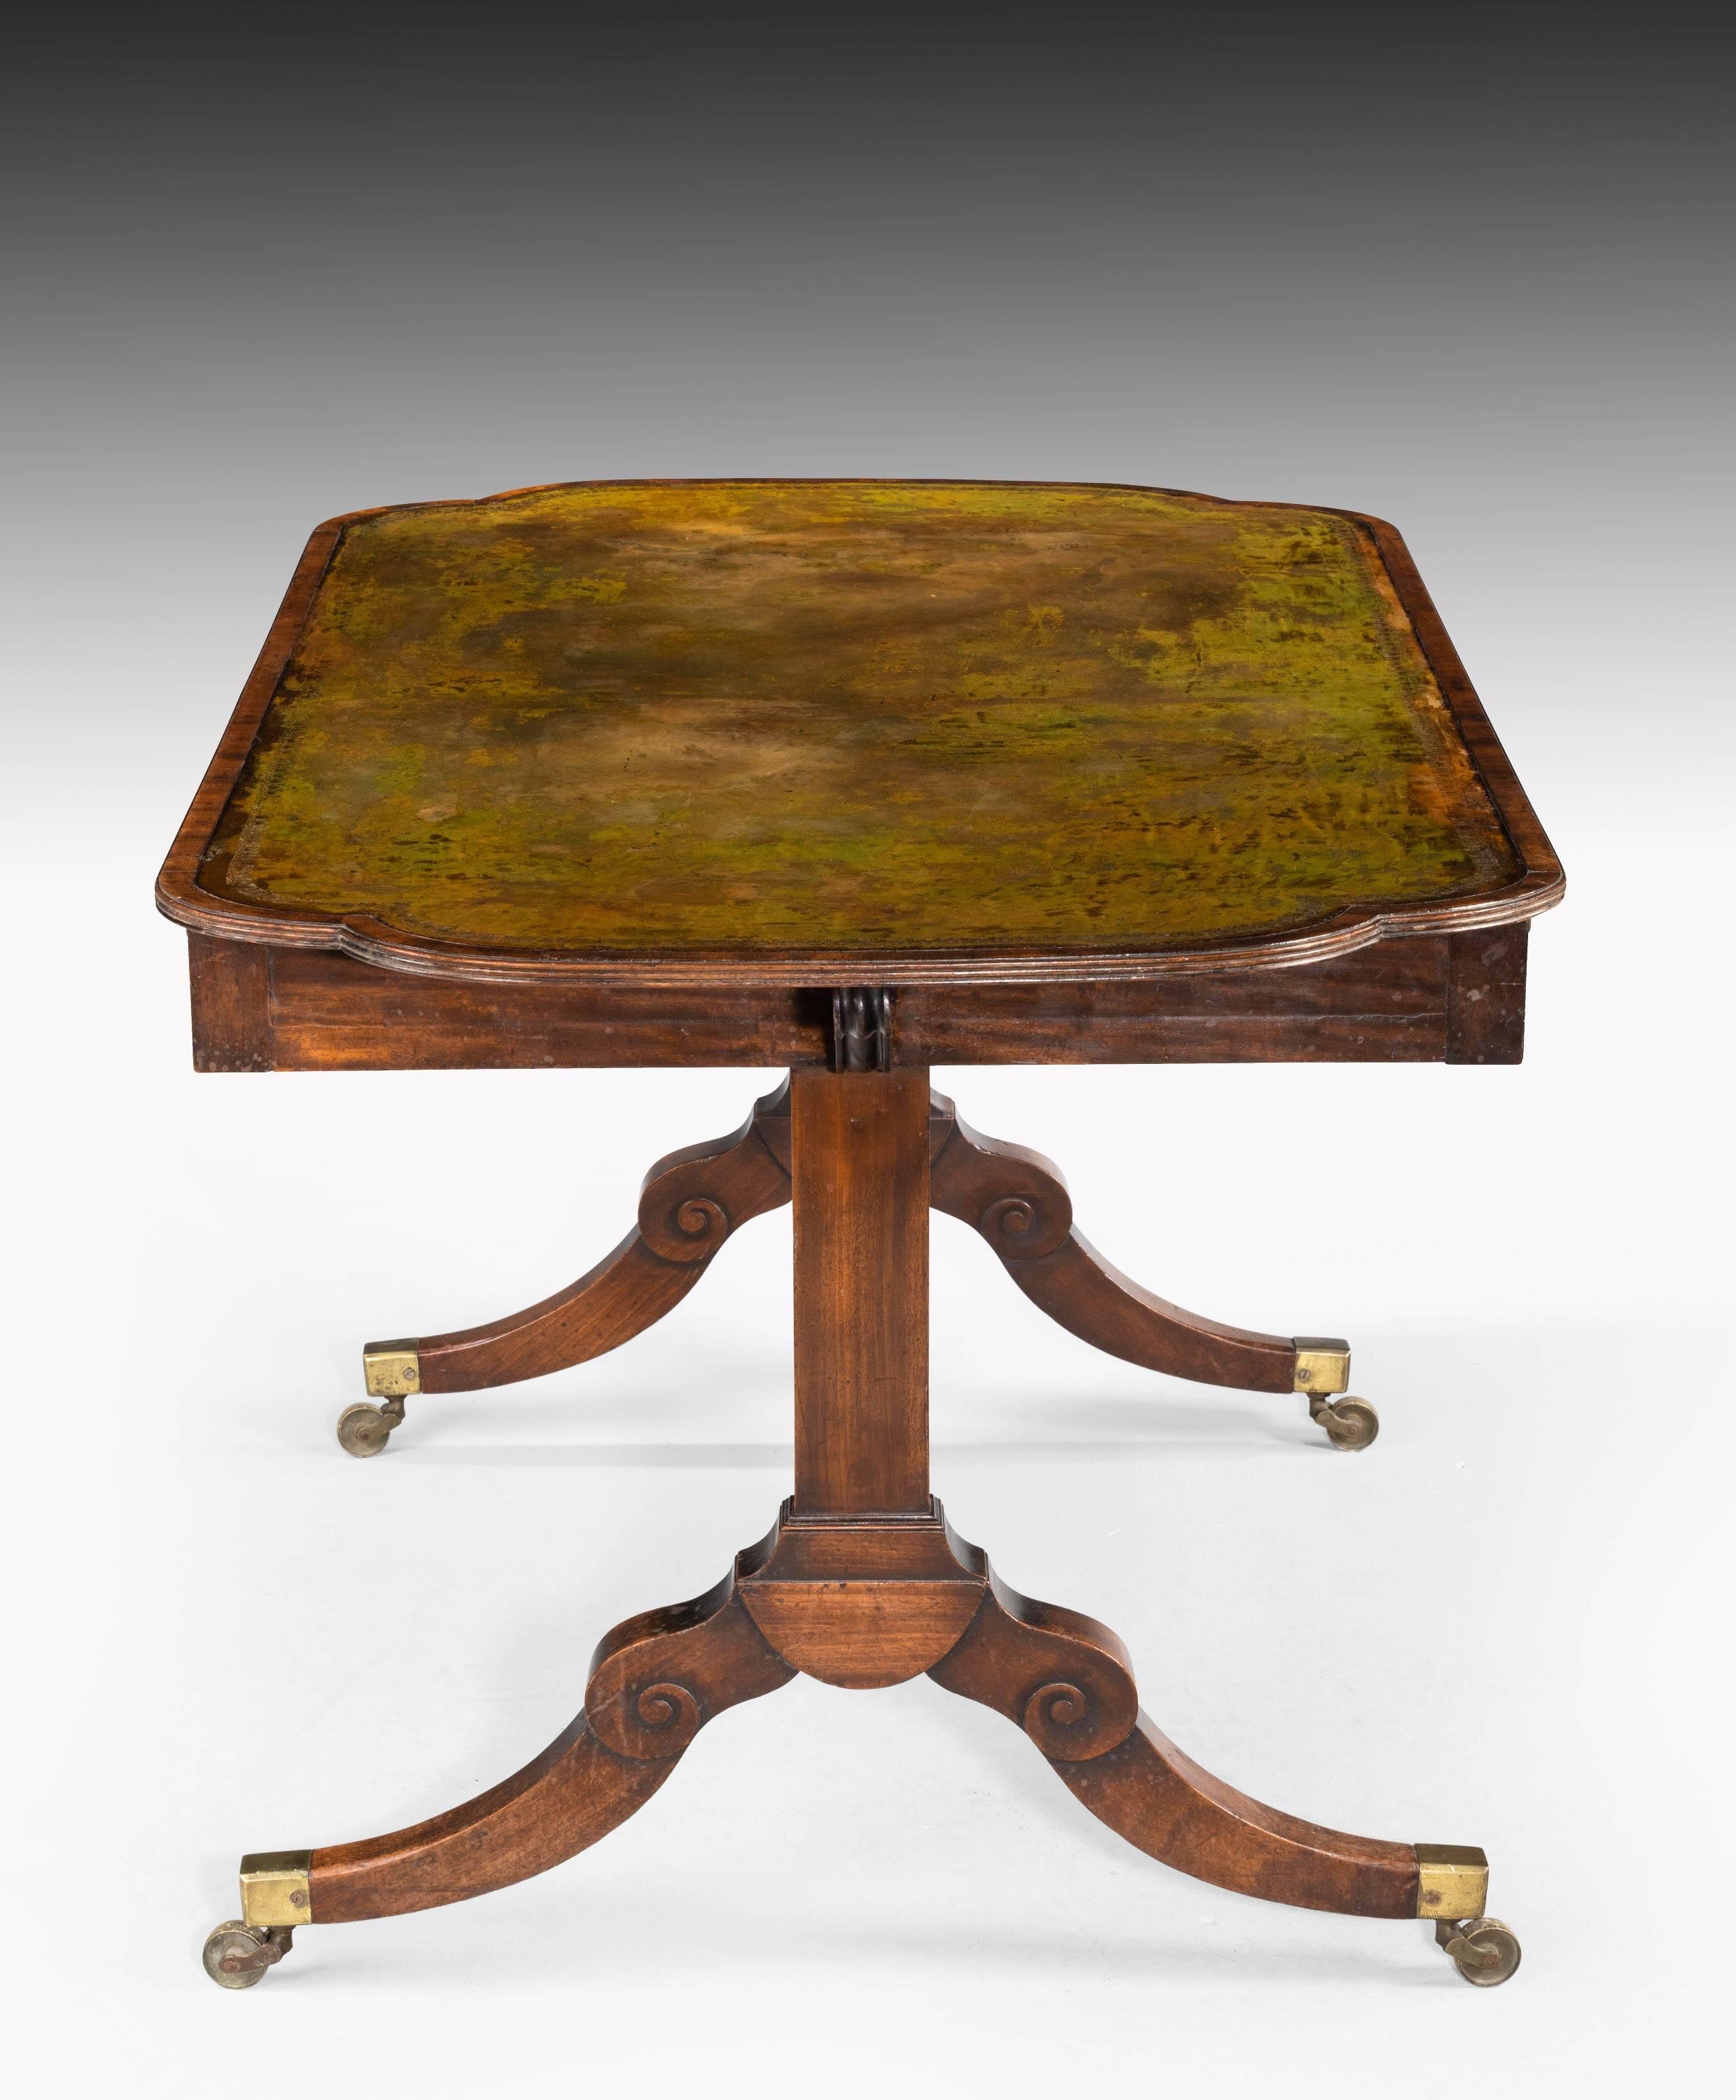 A most unusual Regency period library table with Roman type ends. End supports with a high bowed centre stretcher. Beautiful overall patina and color.
   